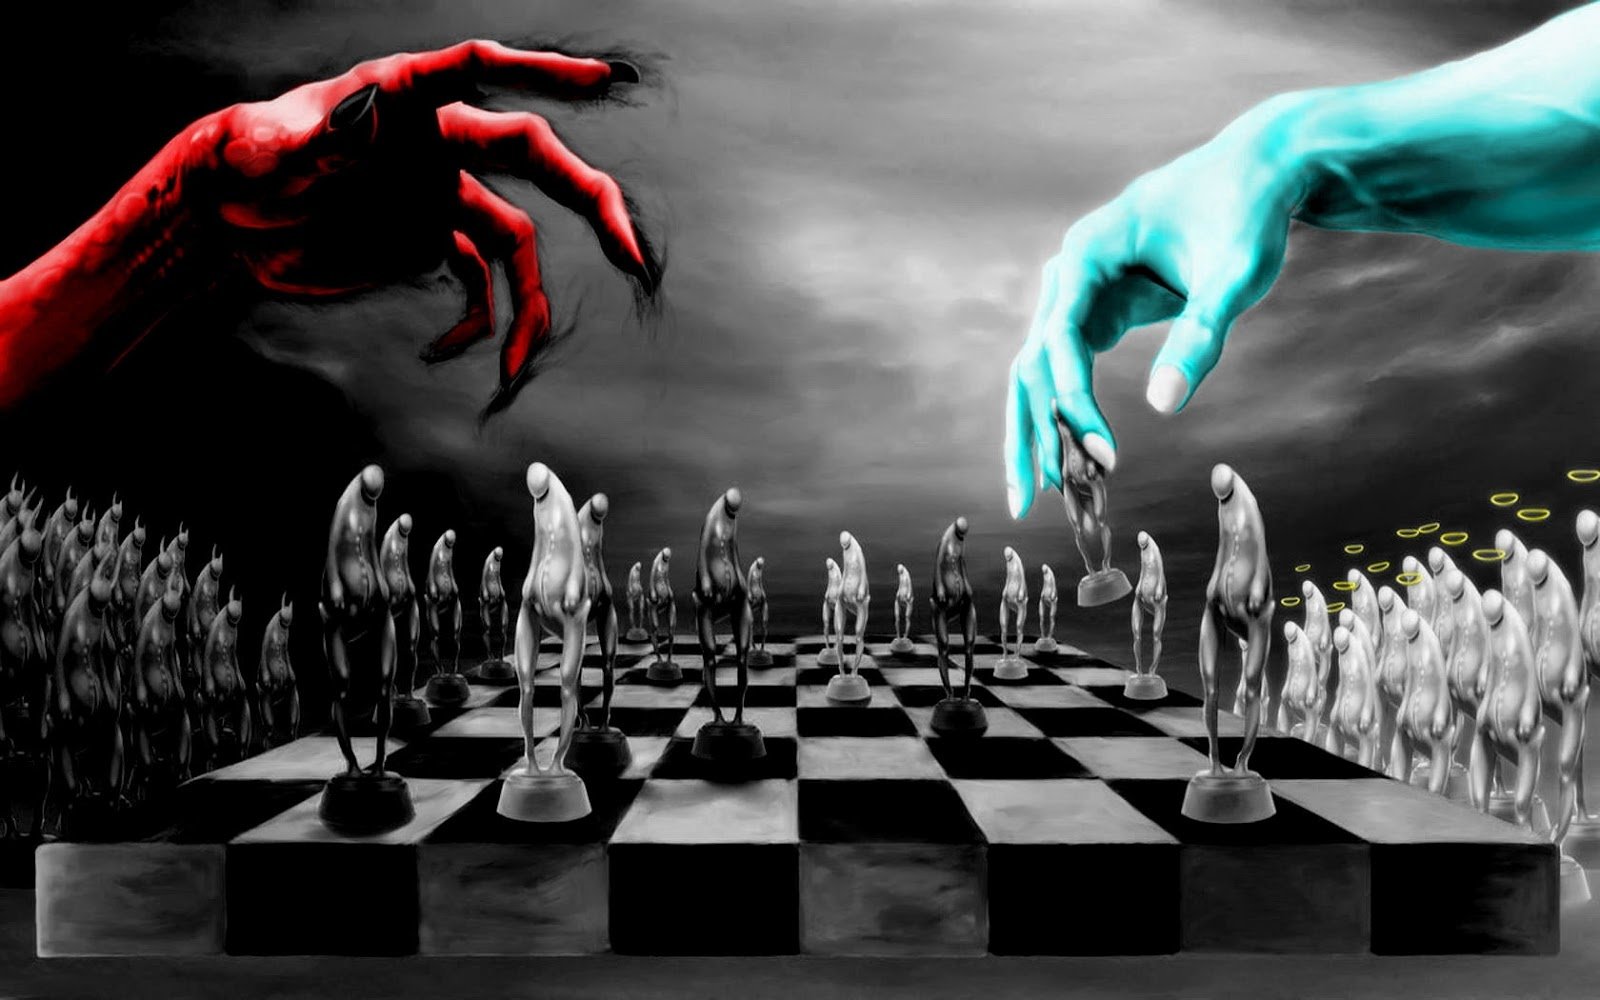 HD wallpapers   Chess wallpapers Free Pictures